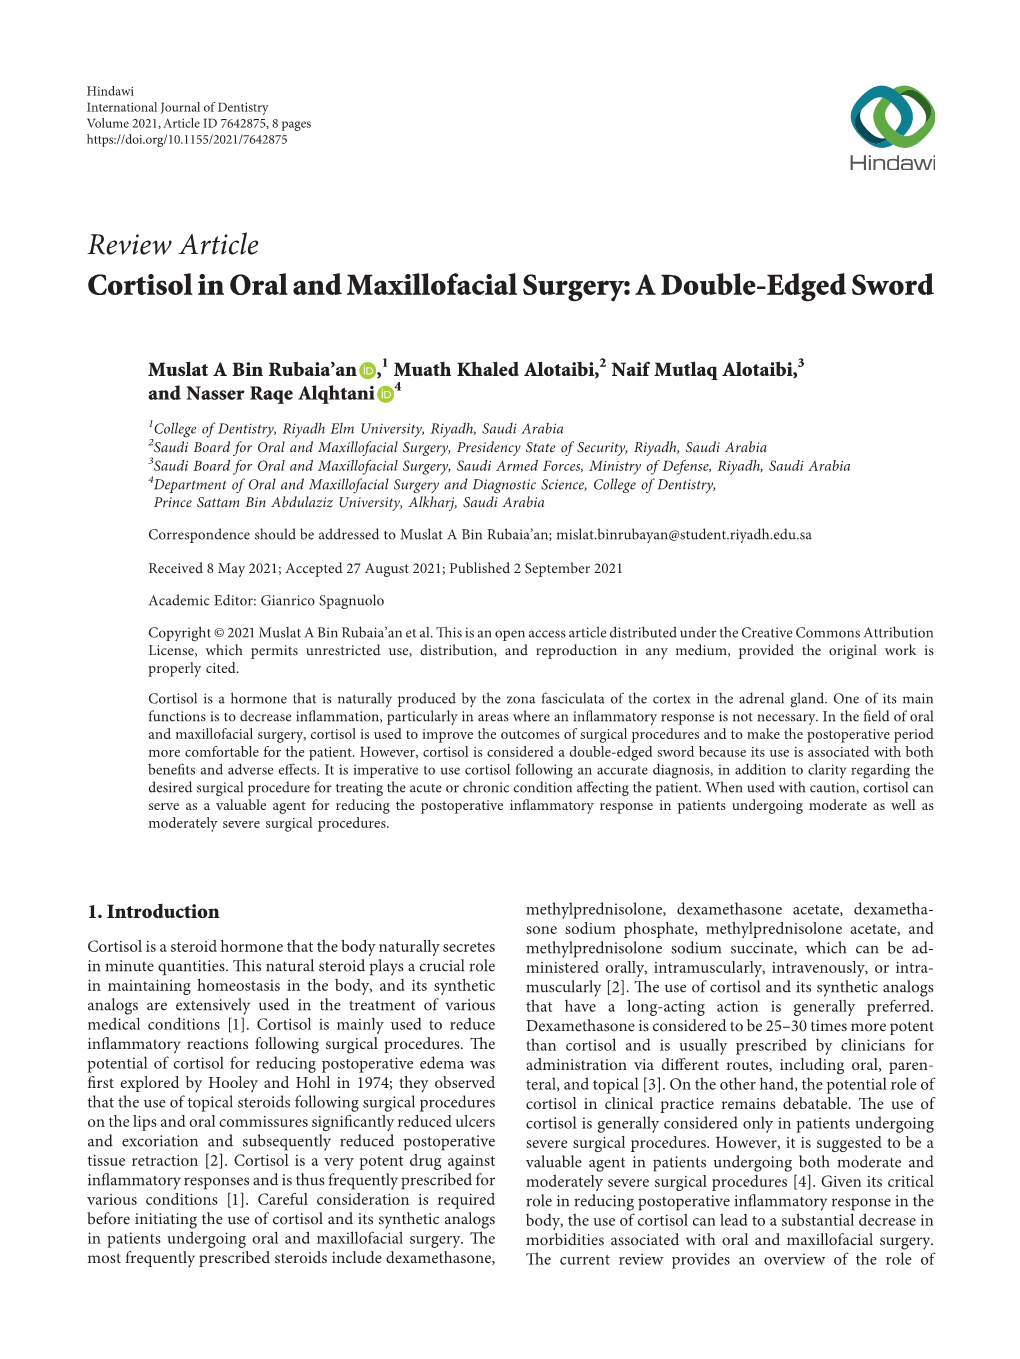 Review Article Cortisol in Oral and Maxillofacial Surgery: a Double-Edged Sword